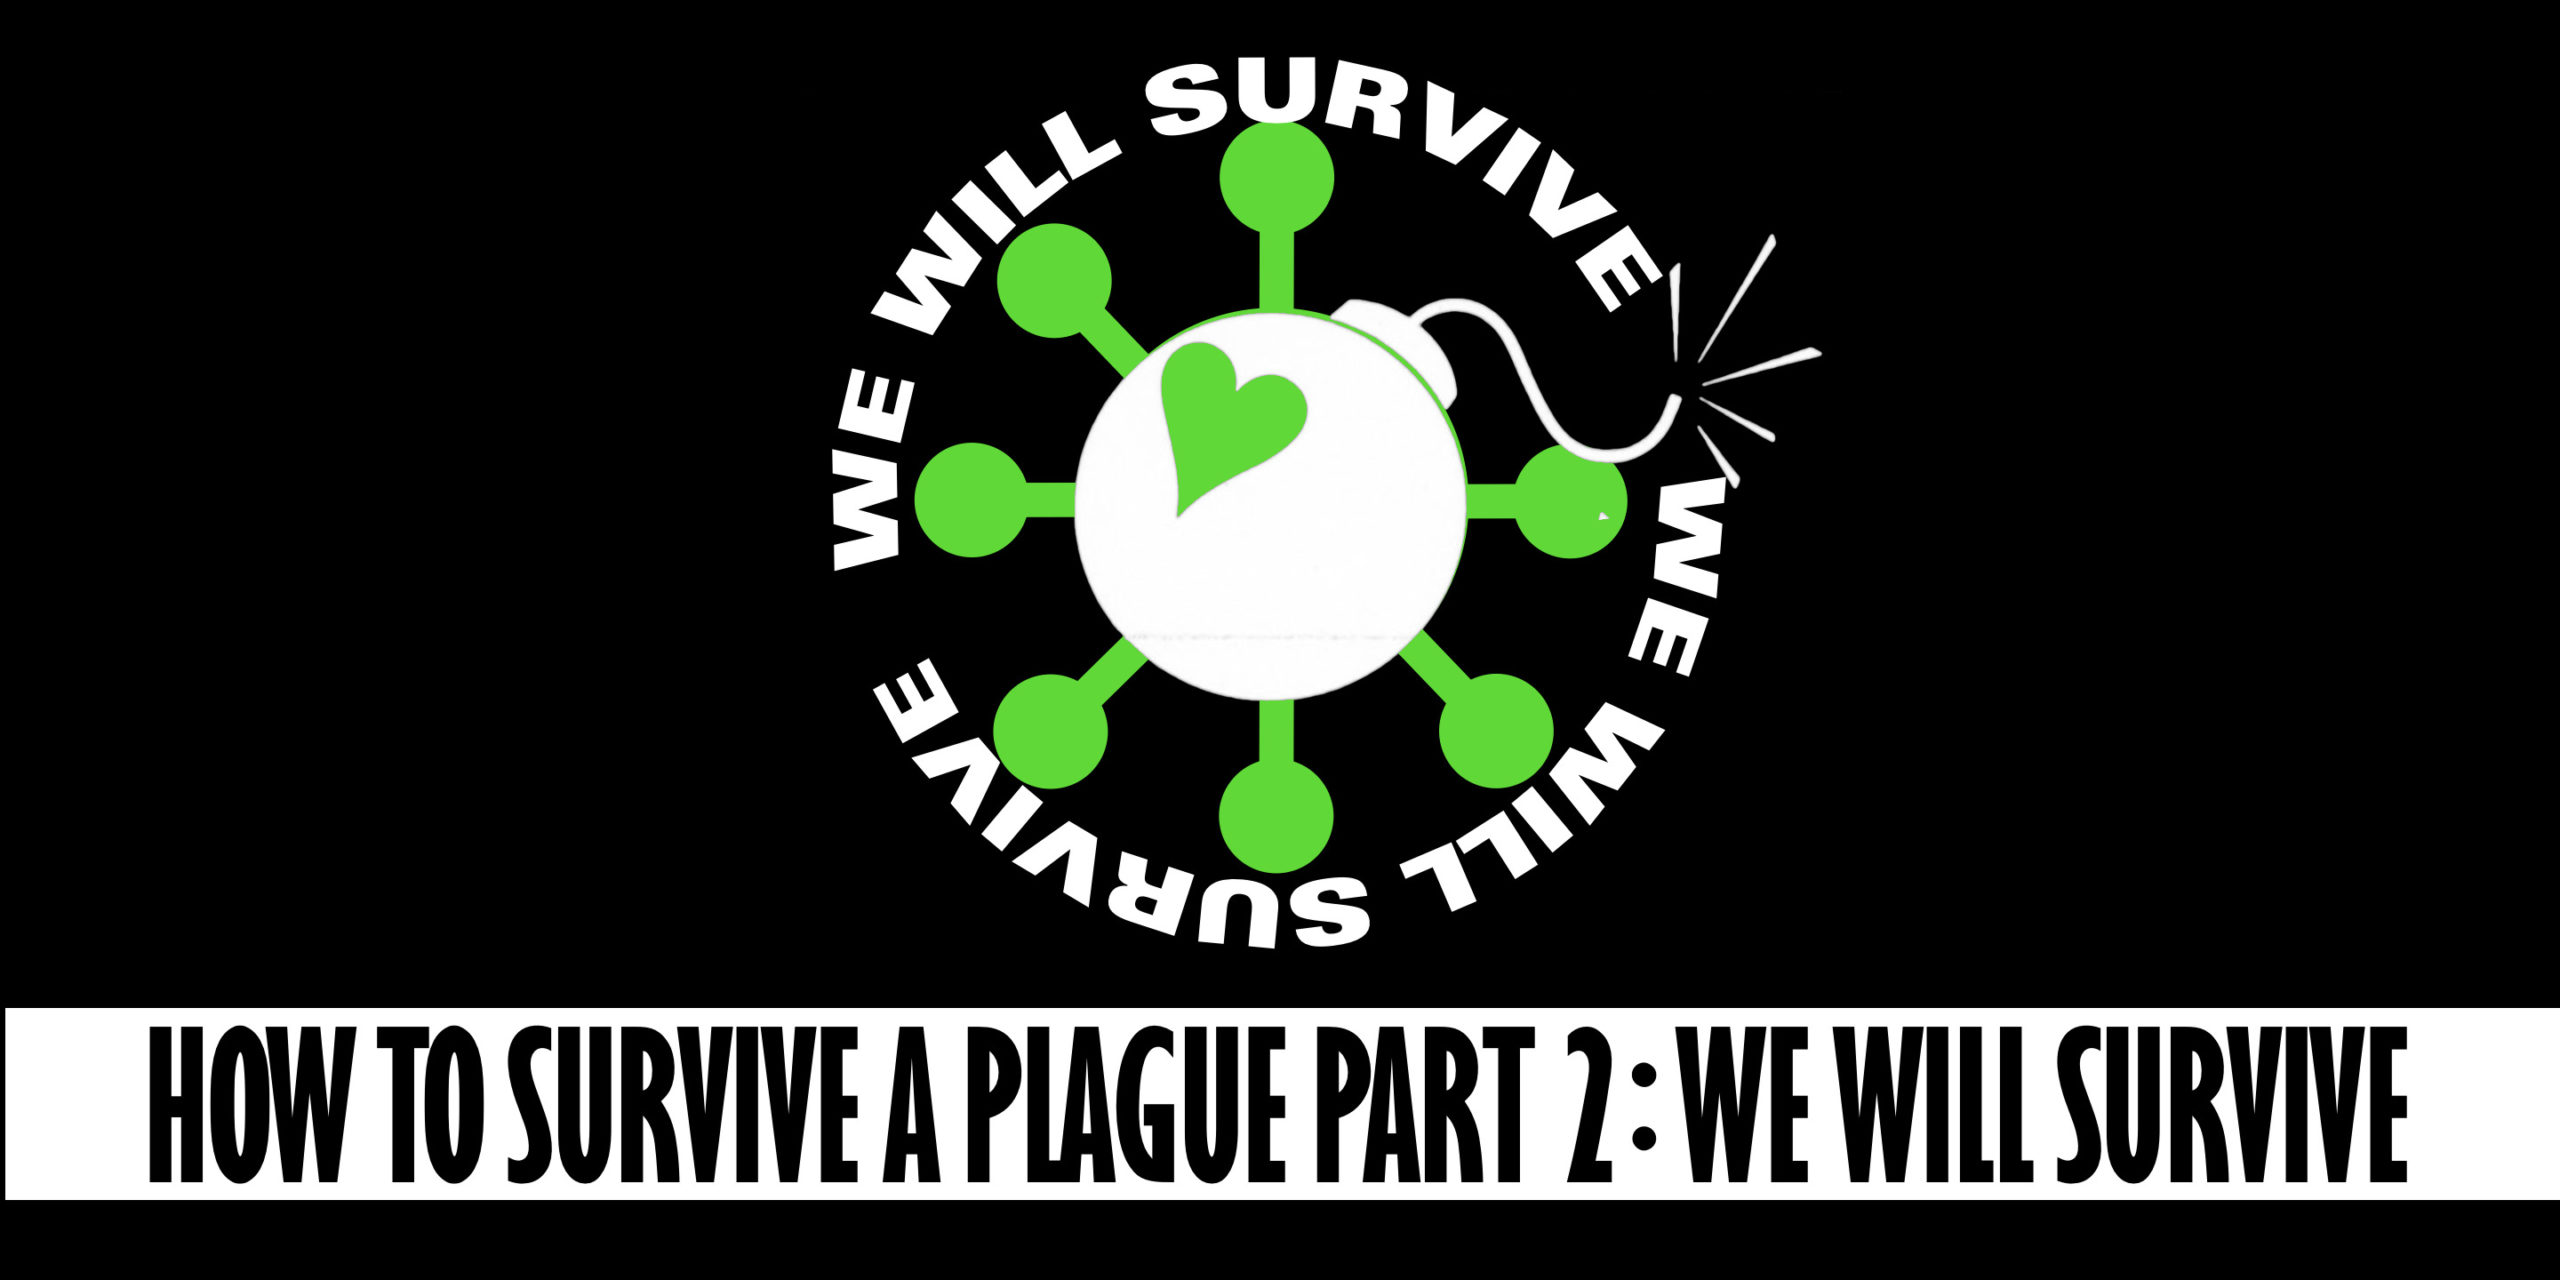 RC 345 - How To Survive a Plague Part 2 - We Will Survive - Lesbian Avengers Covid logo bomb Act Up AIDS HIV music LGBTQ queer history